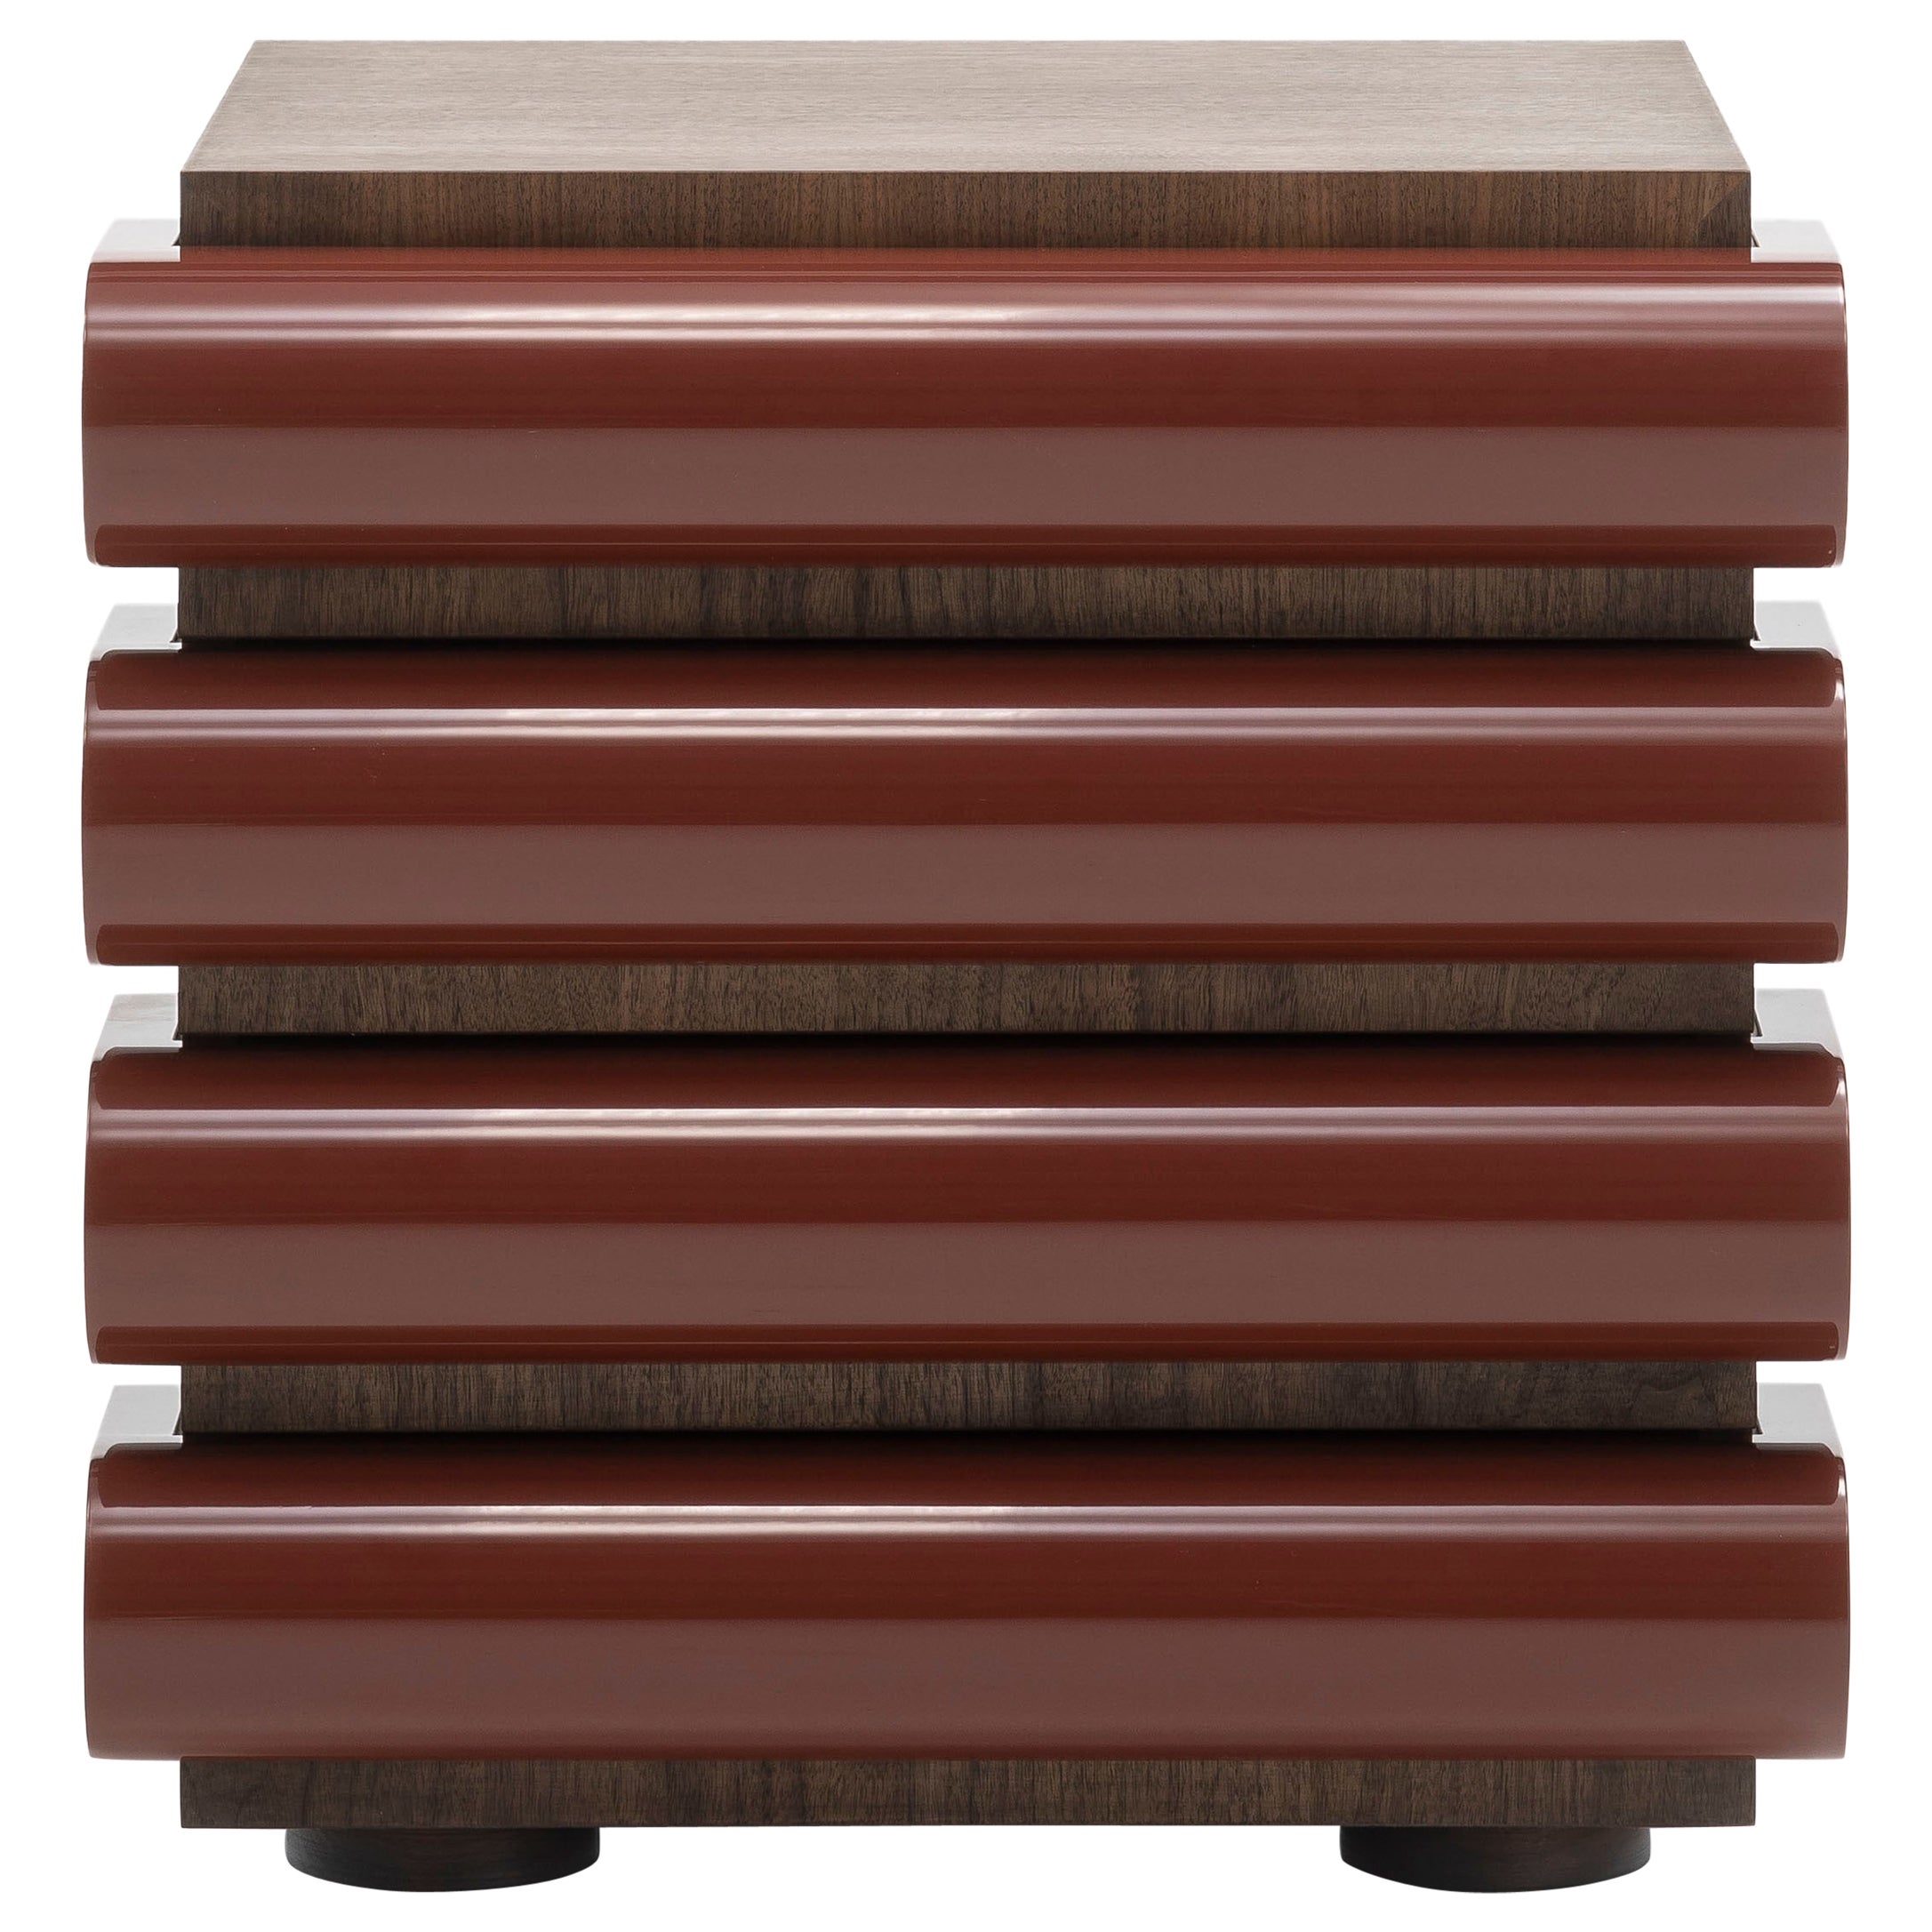 Acerbis Storet Drawers Cabinet in Dark Stained Walnut with Brick Red Lacquered For Sale